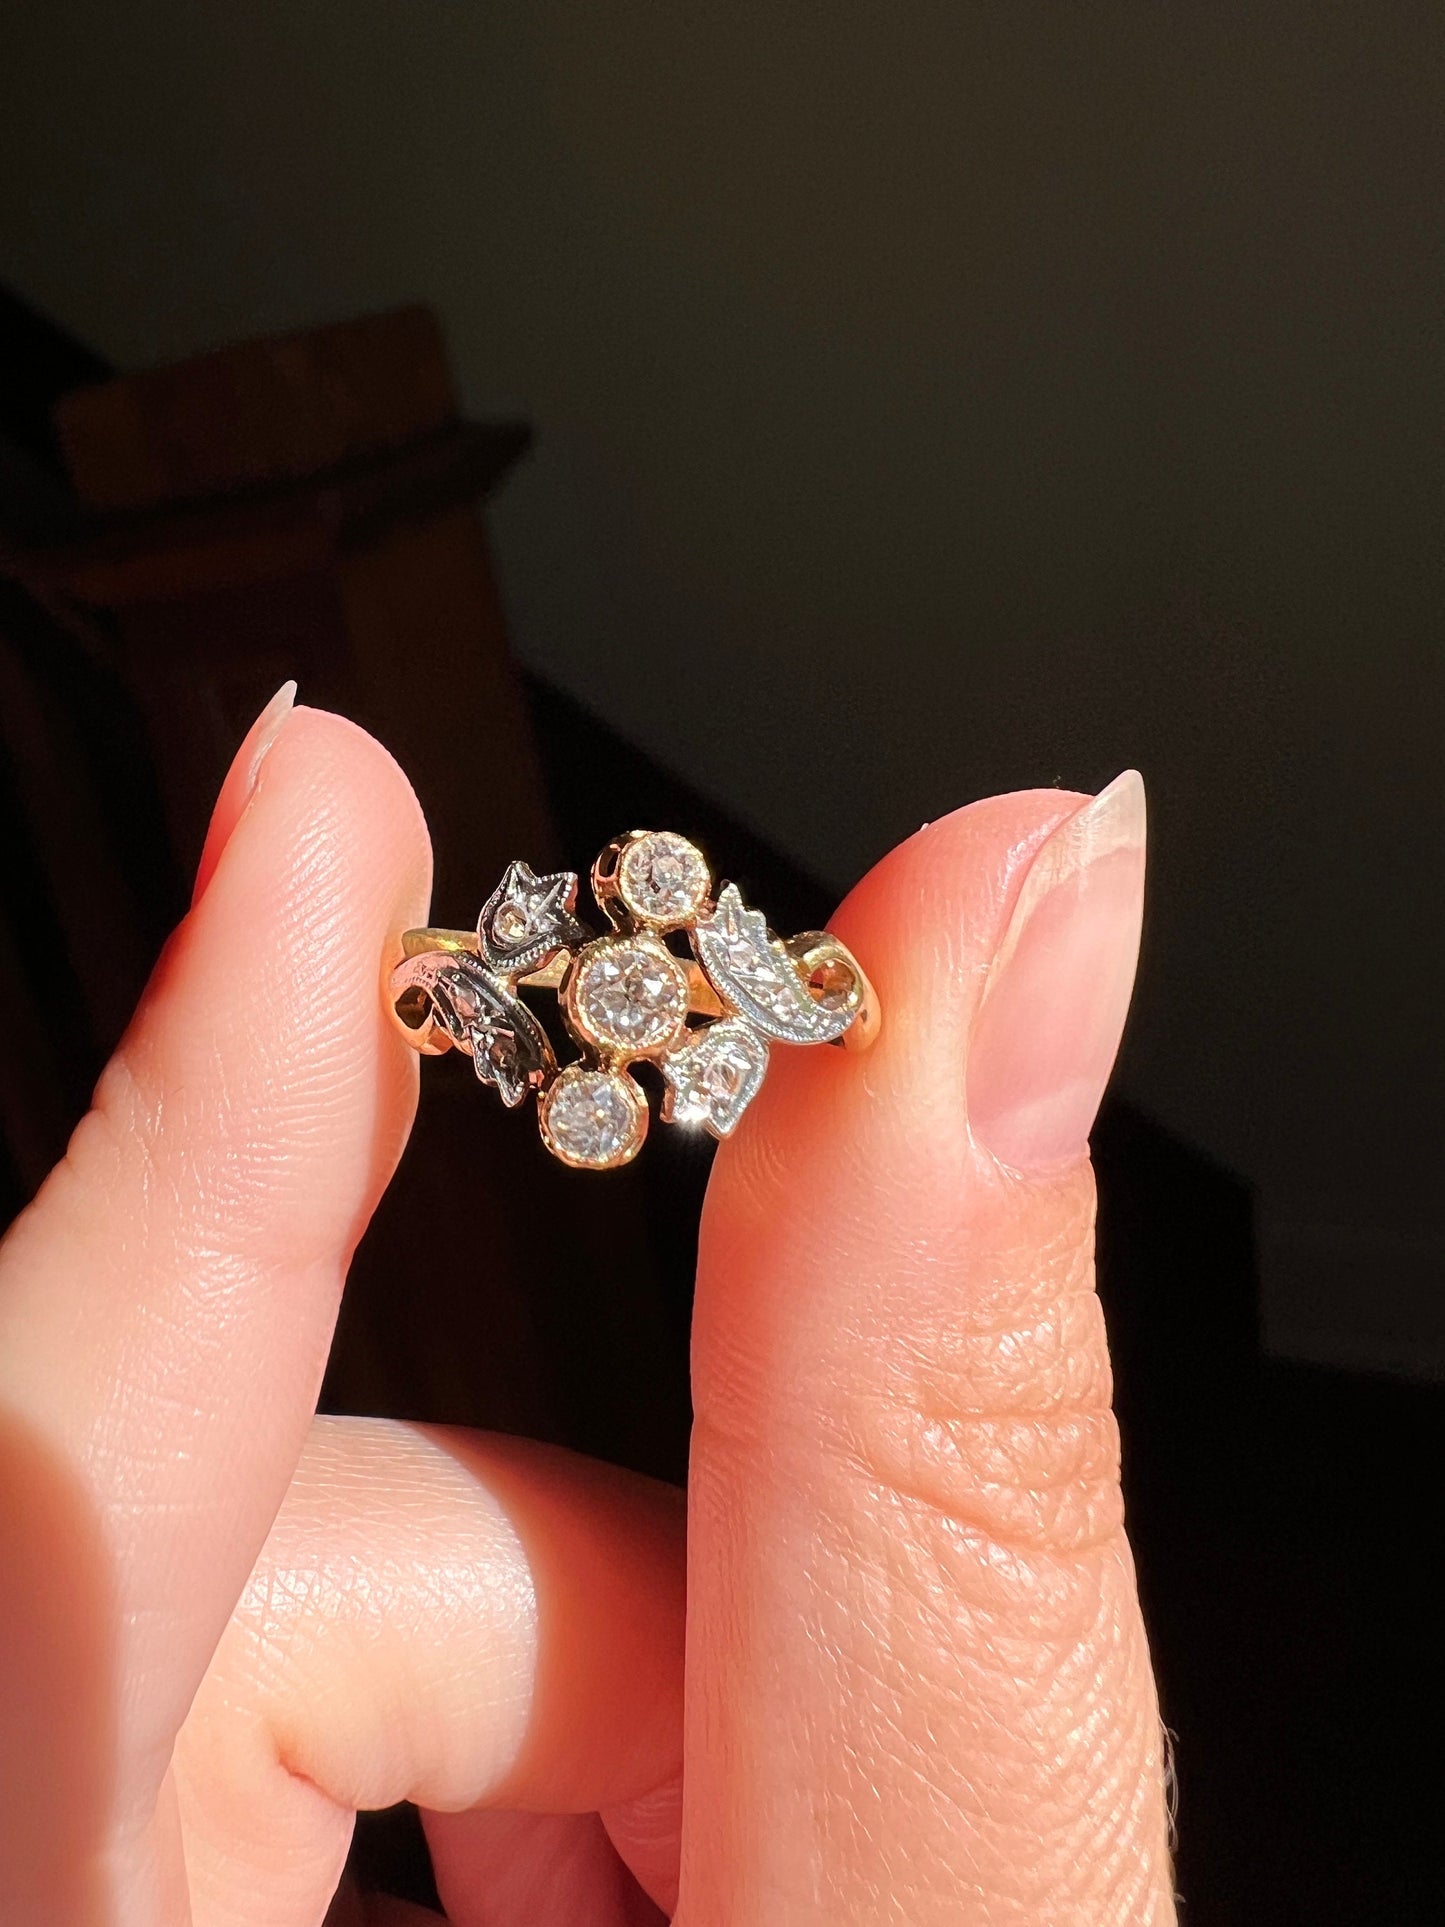 TULIPS Old Mine Rose Cut Diamond French Antique Belle Epoque Ring 18k Gold Art Nouveau Victorian Ornate Sparkle Floral Swirl Romantic Gift